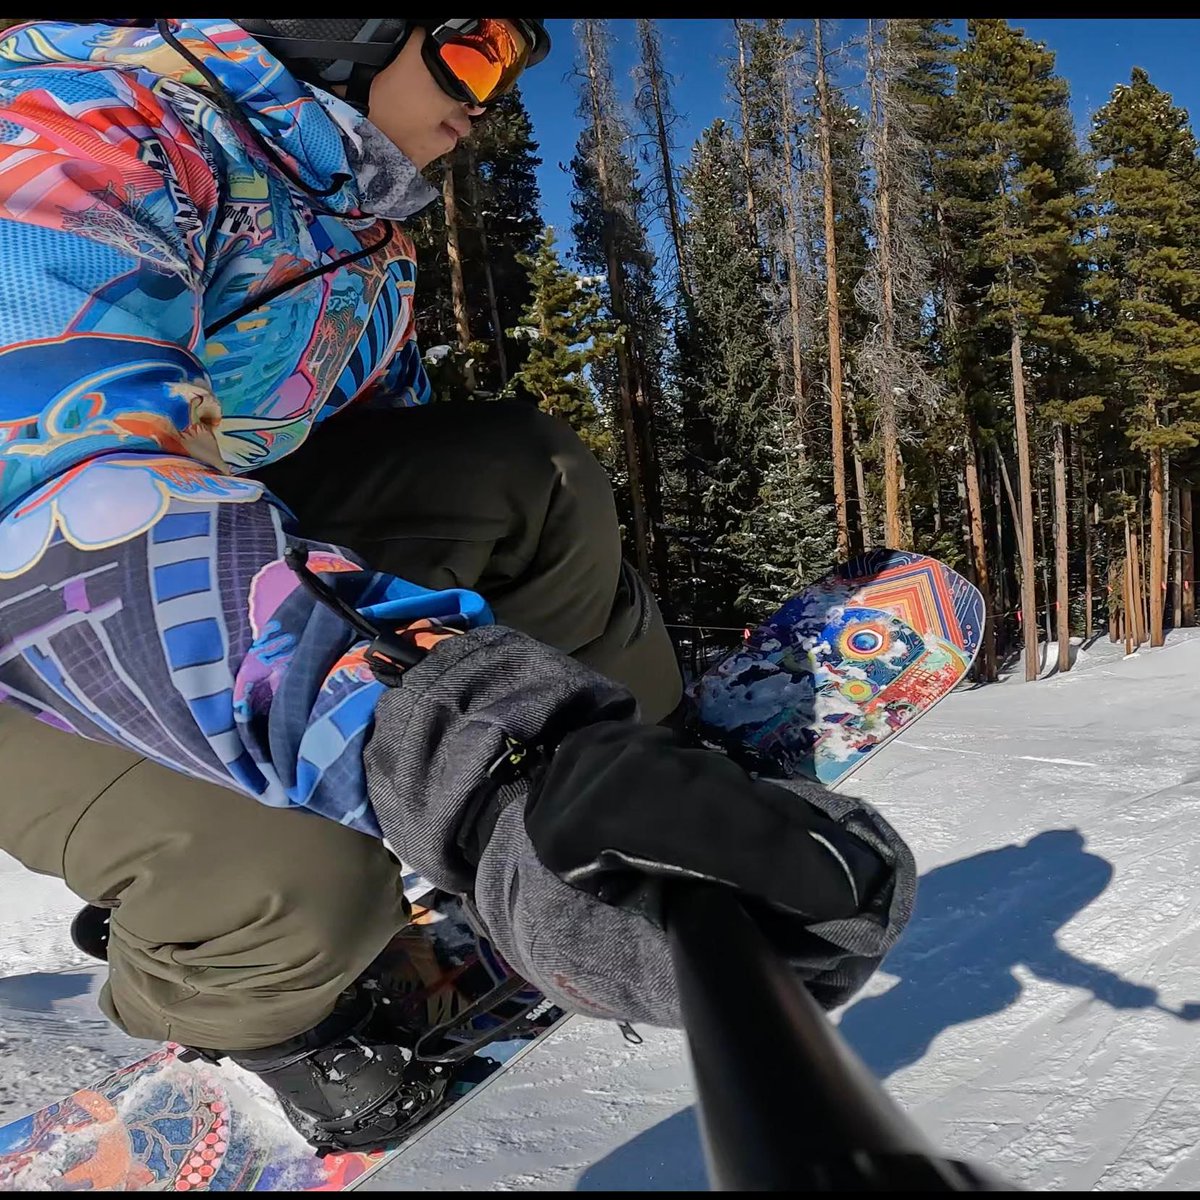 Learning to ride with a #GoPro and a selfie stick has been a challenge....

At least style points count for something!

@Android_Jones|@threyda|@neversummerind|@GoPro 
#GoSnowboarding